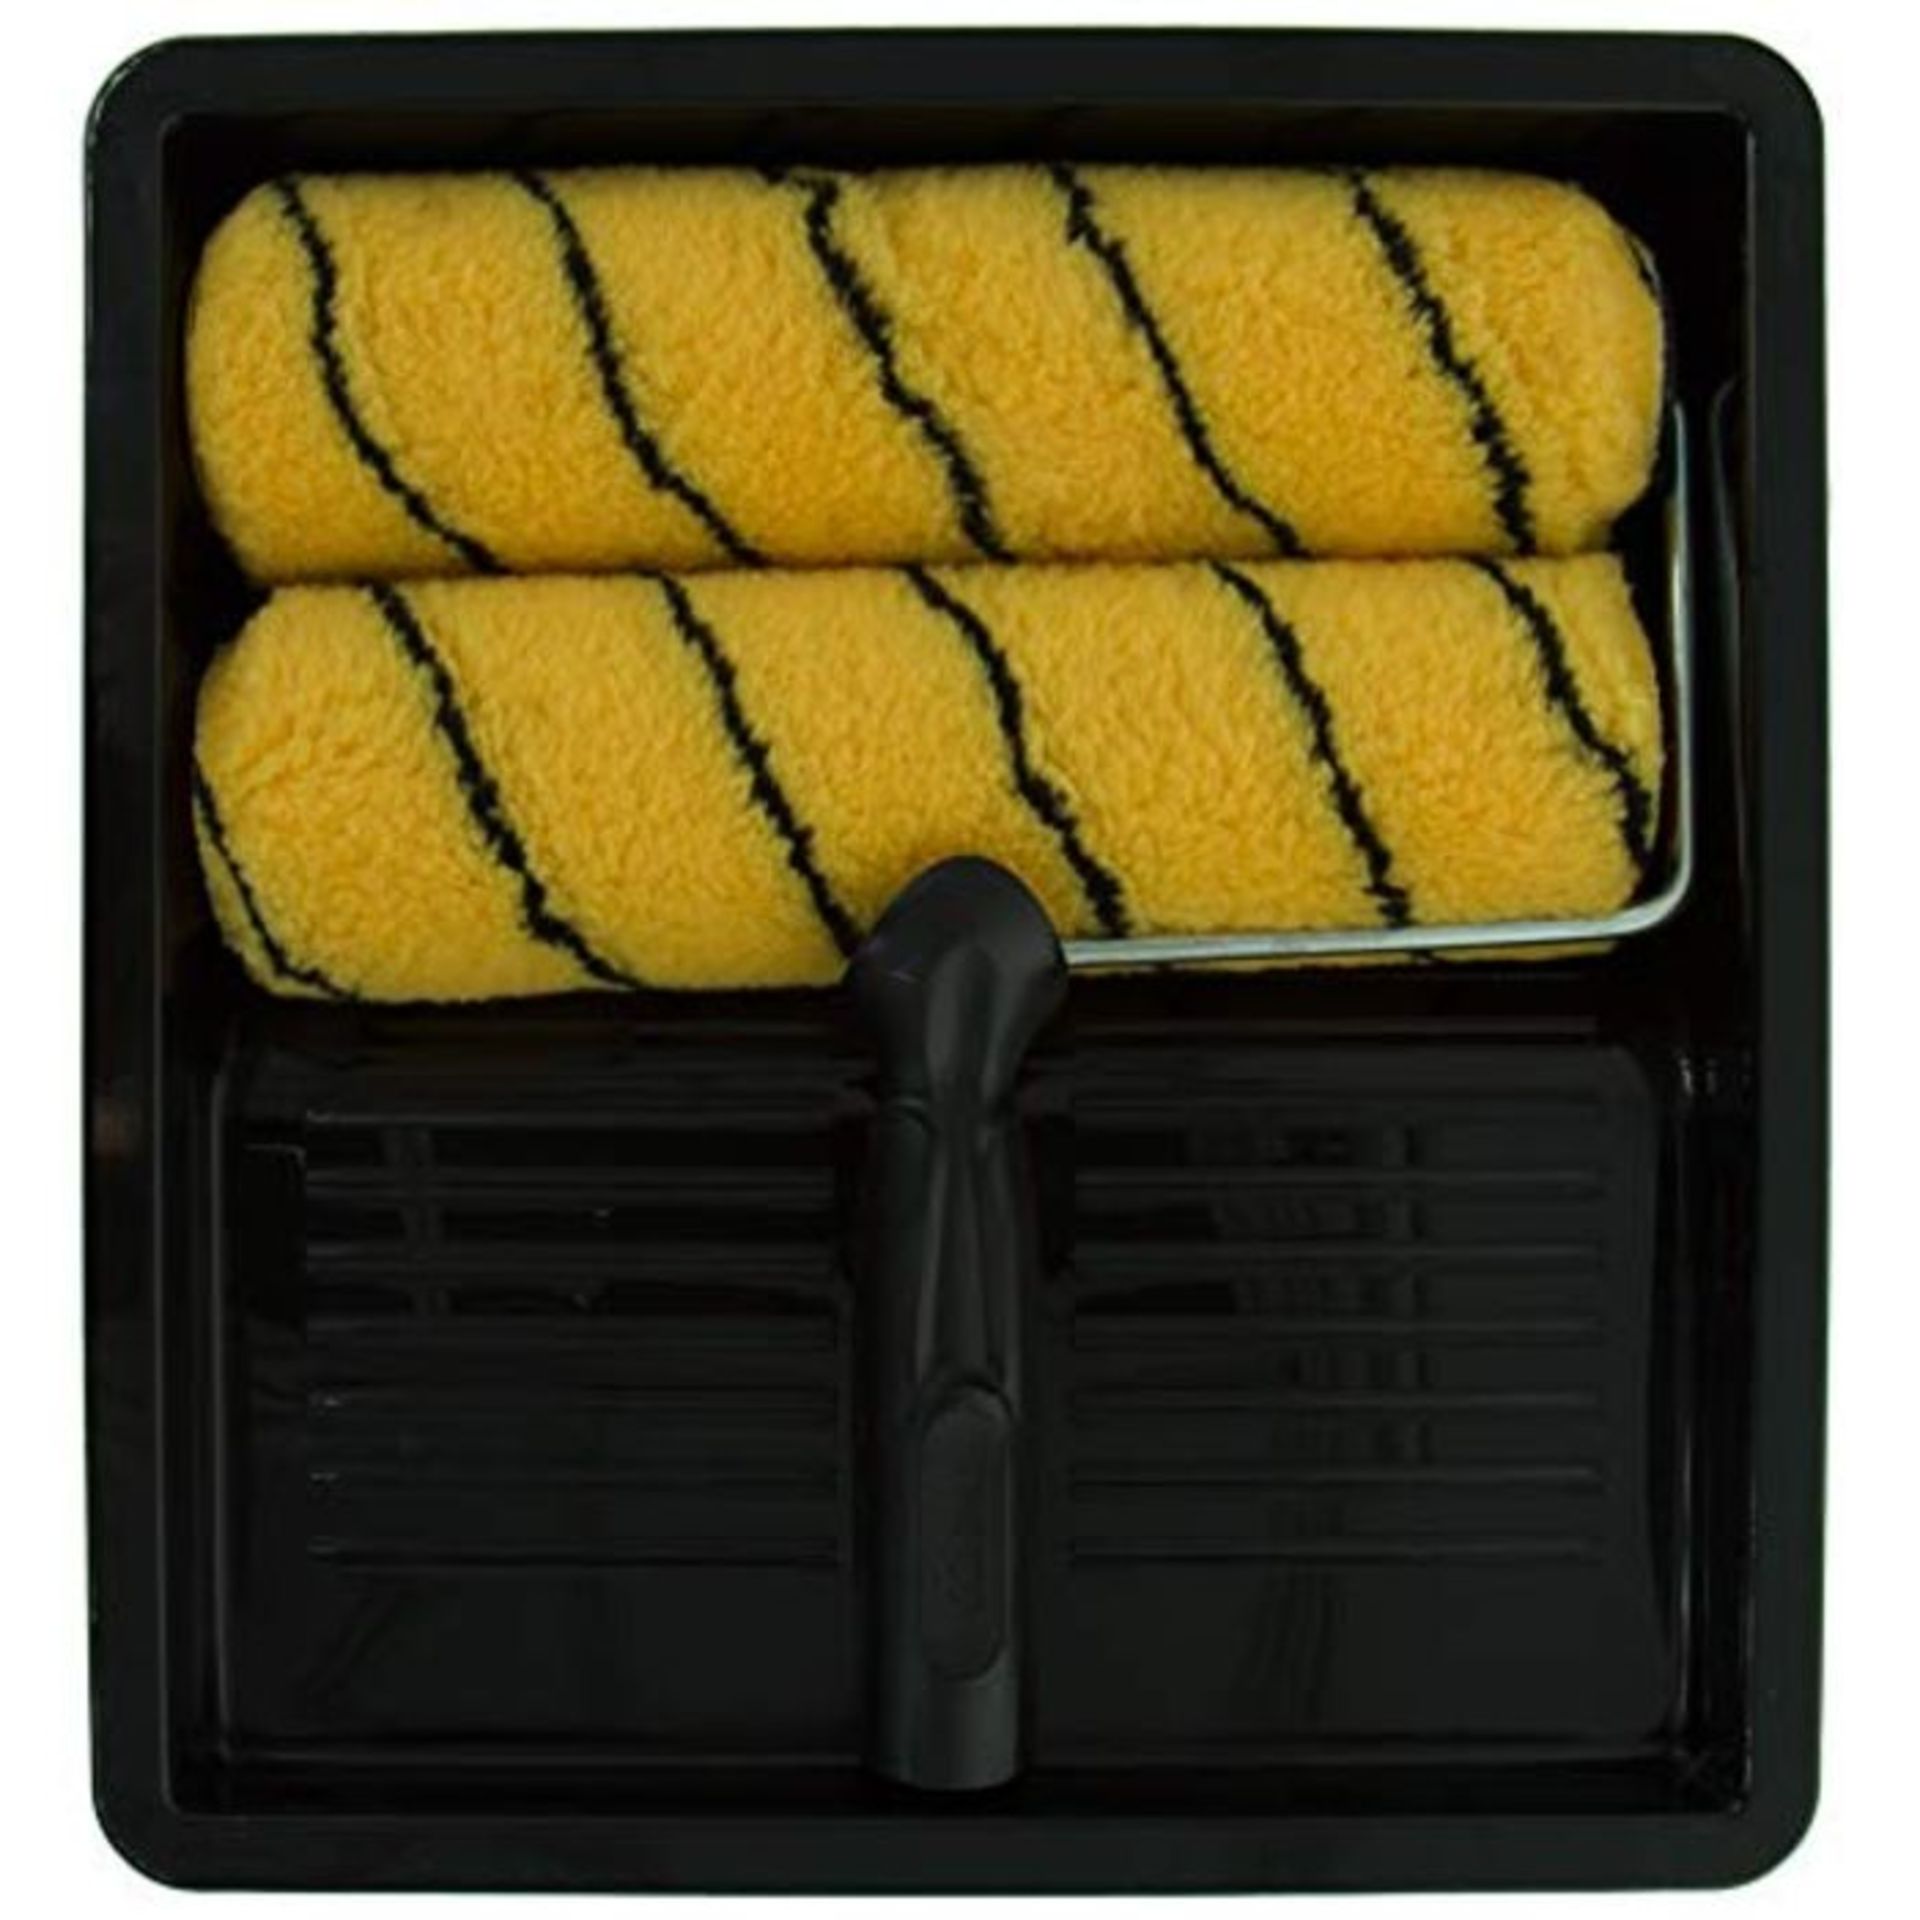 [CRACKED] Coral 43101 Paint Roller Set with 2 Sleeves, Black, 9" 4 pcs, Set of 4 Piece